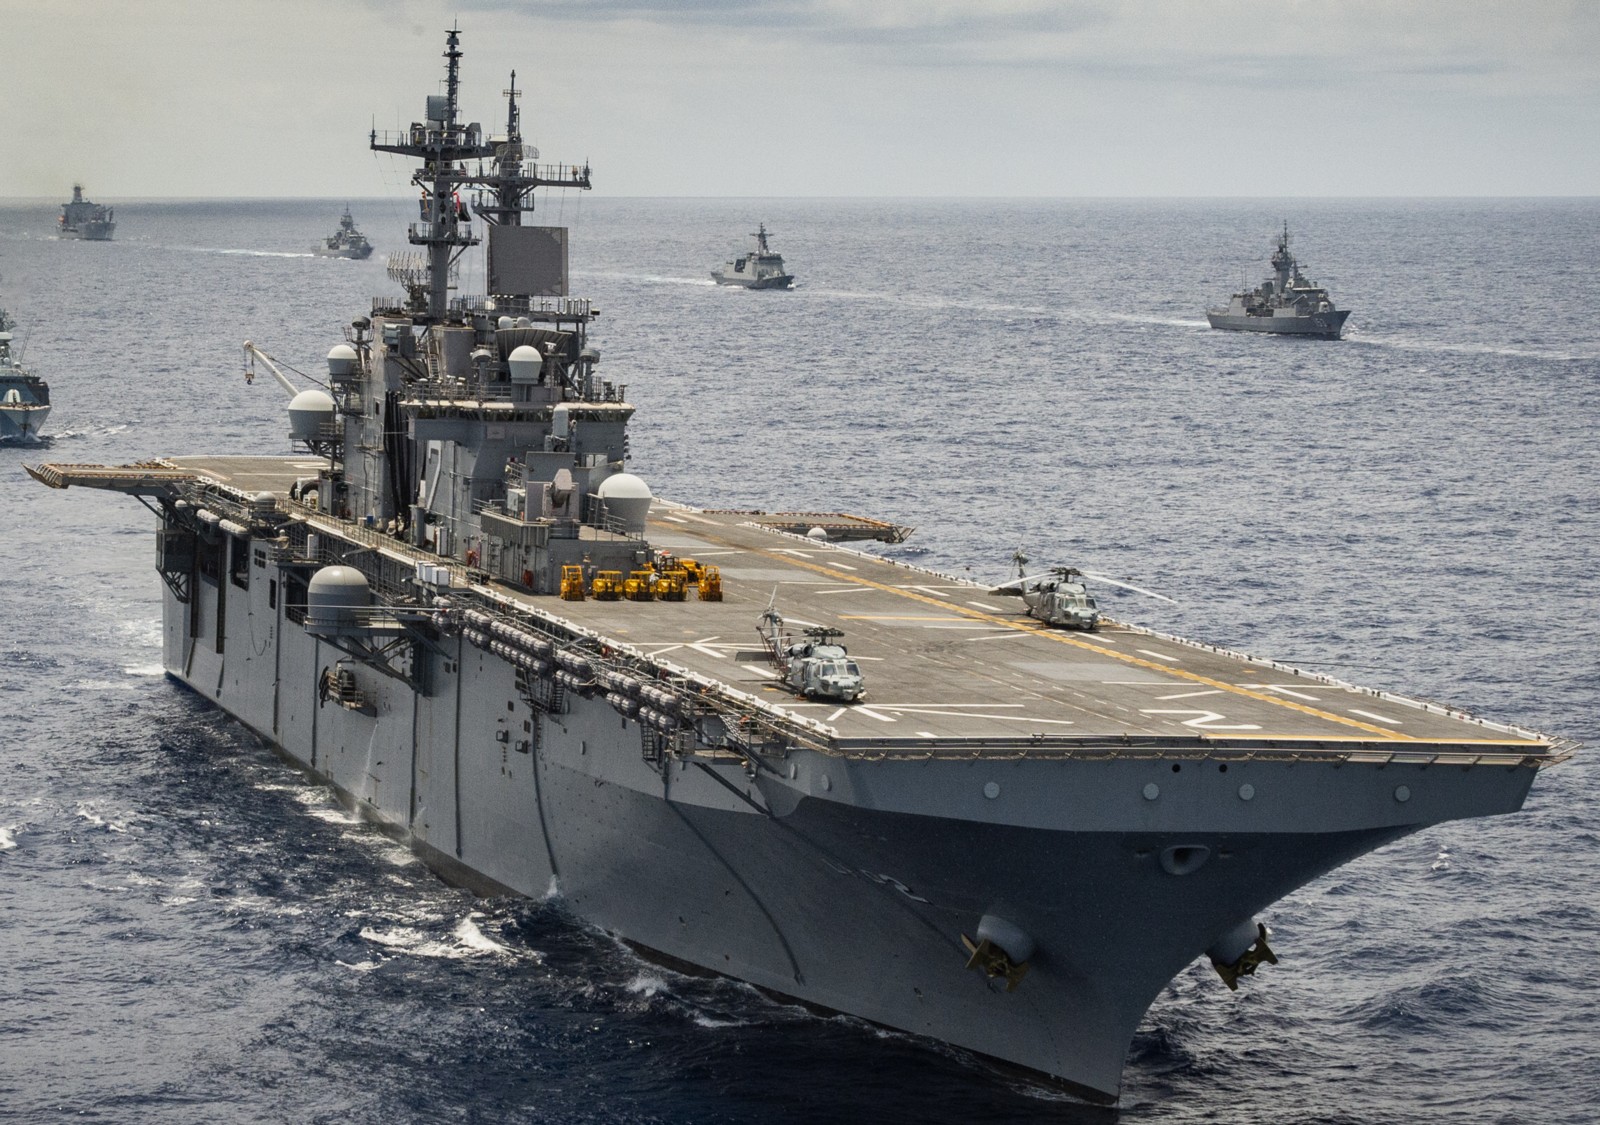 lhd-2 uss essex wasp class amphibious assault ship landing helicopter us navy marines exercise rimpac 2020 200